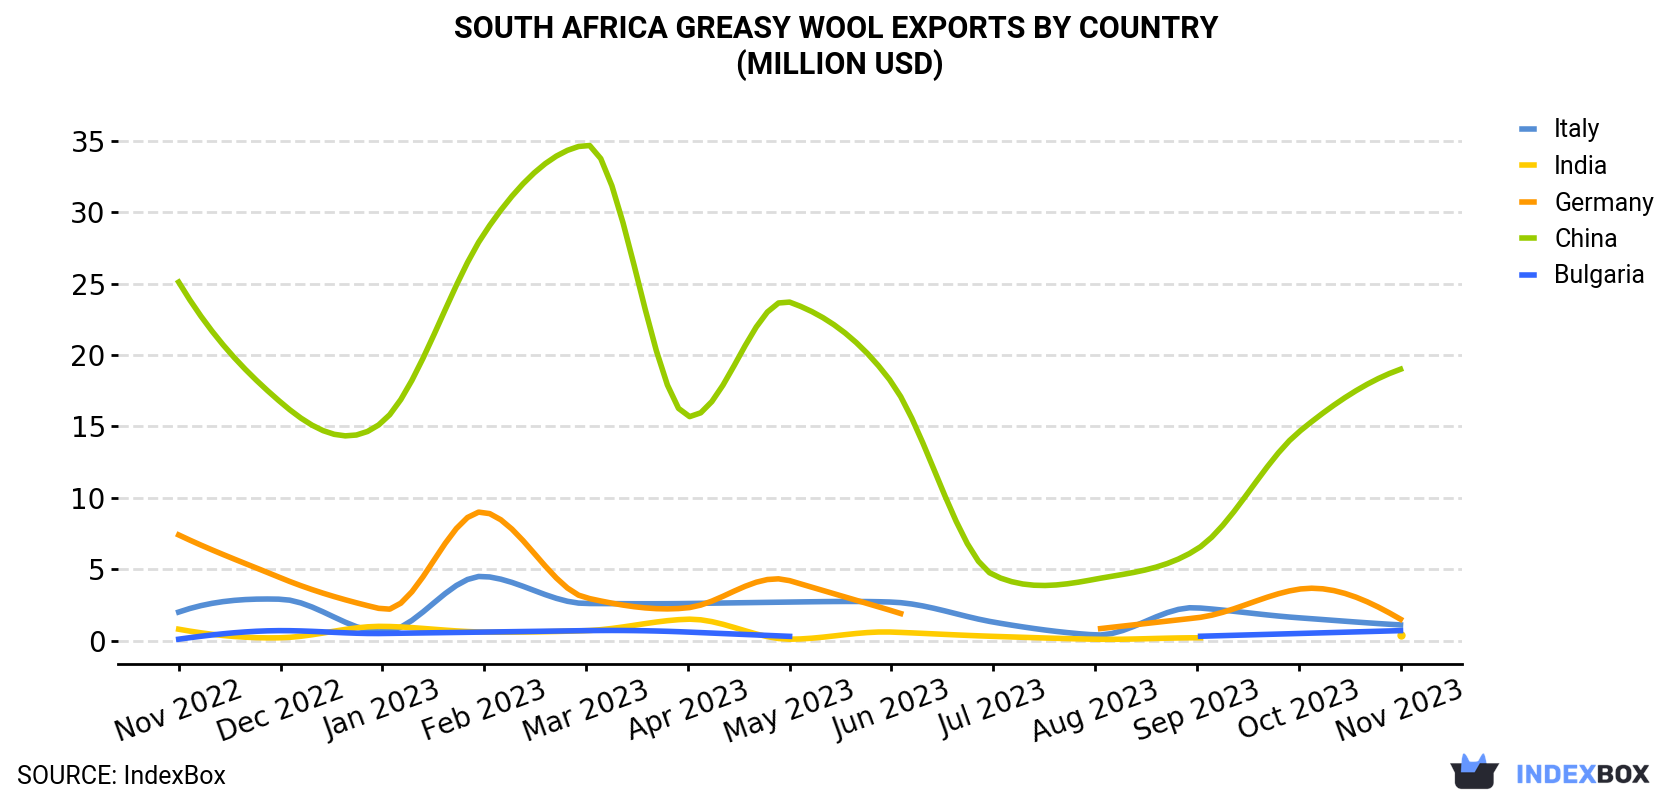 South Africa Greasy Wool Exports By Country (Million USD)